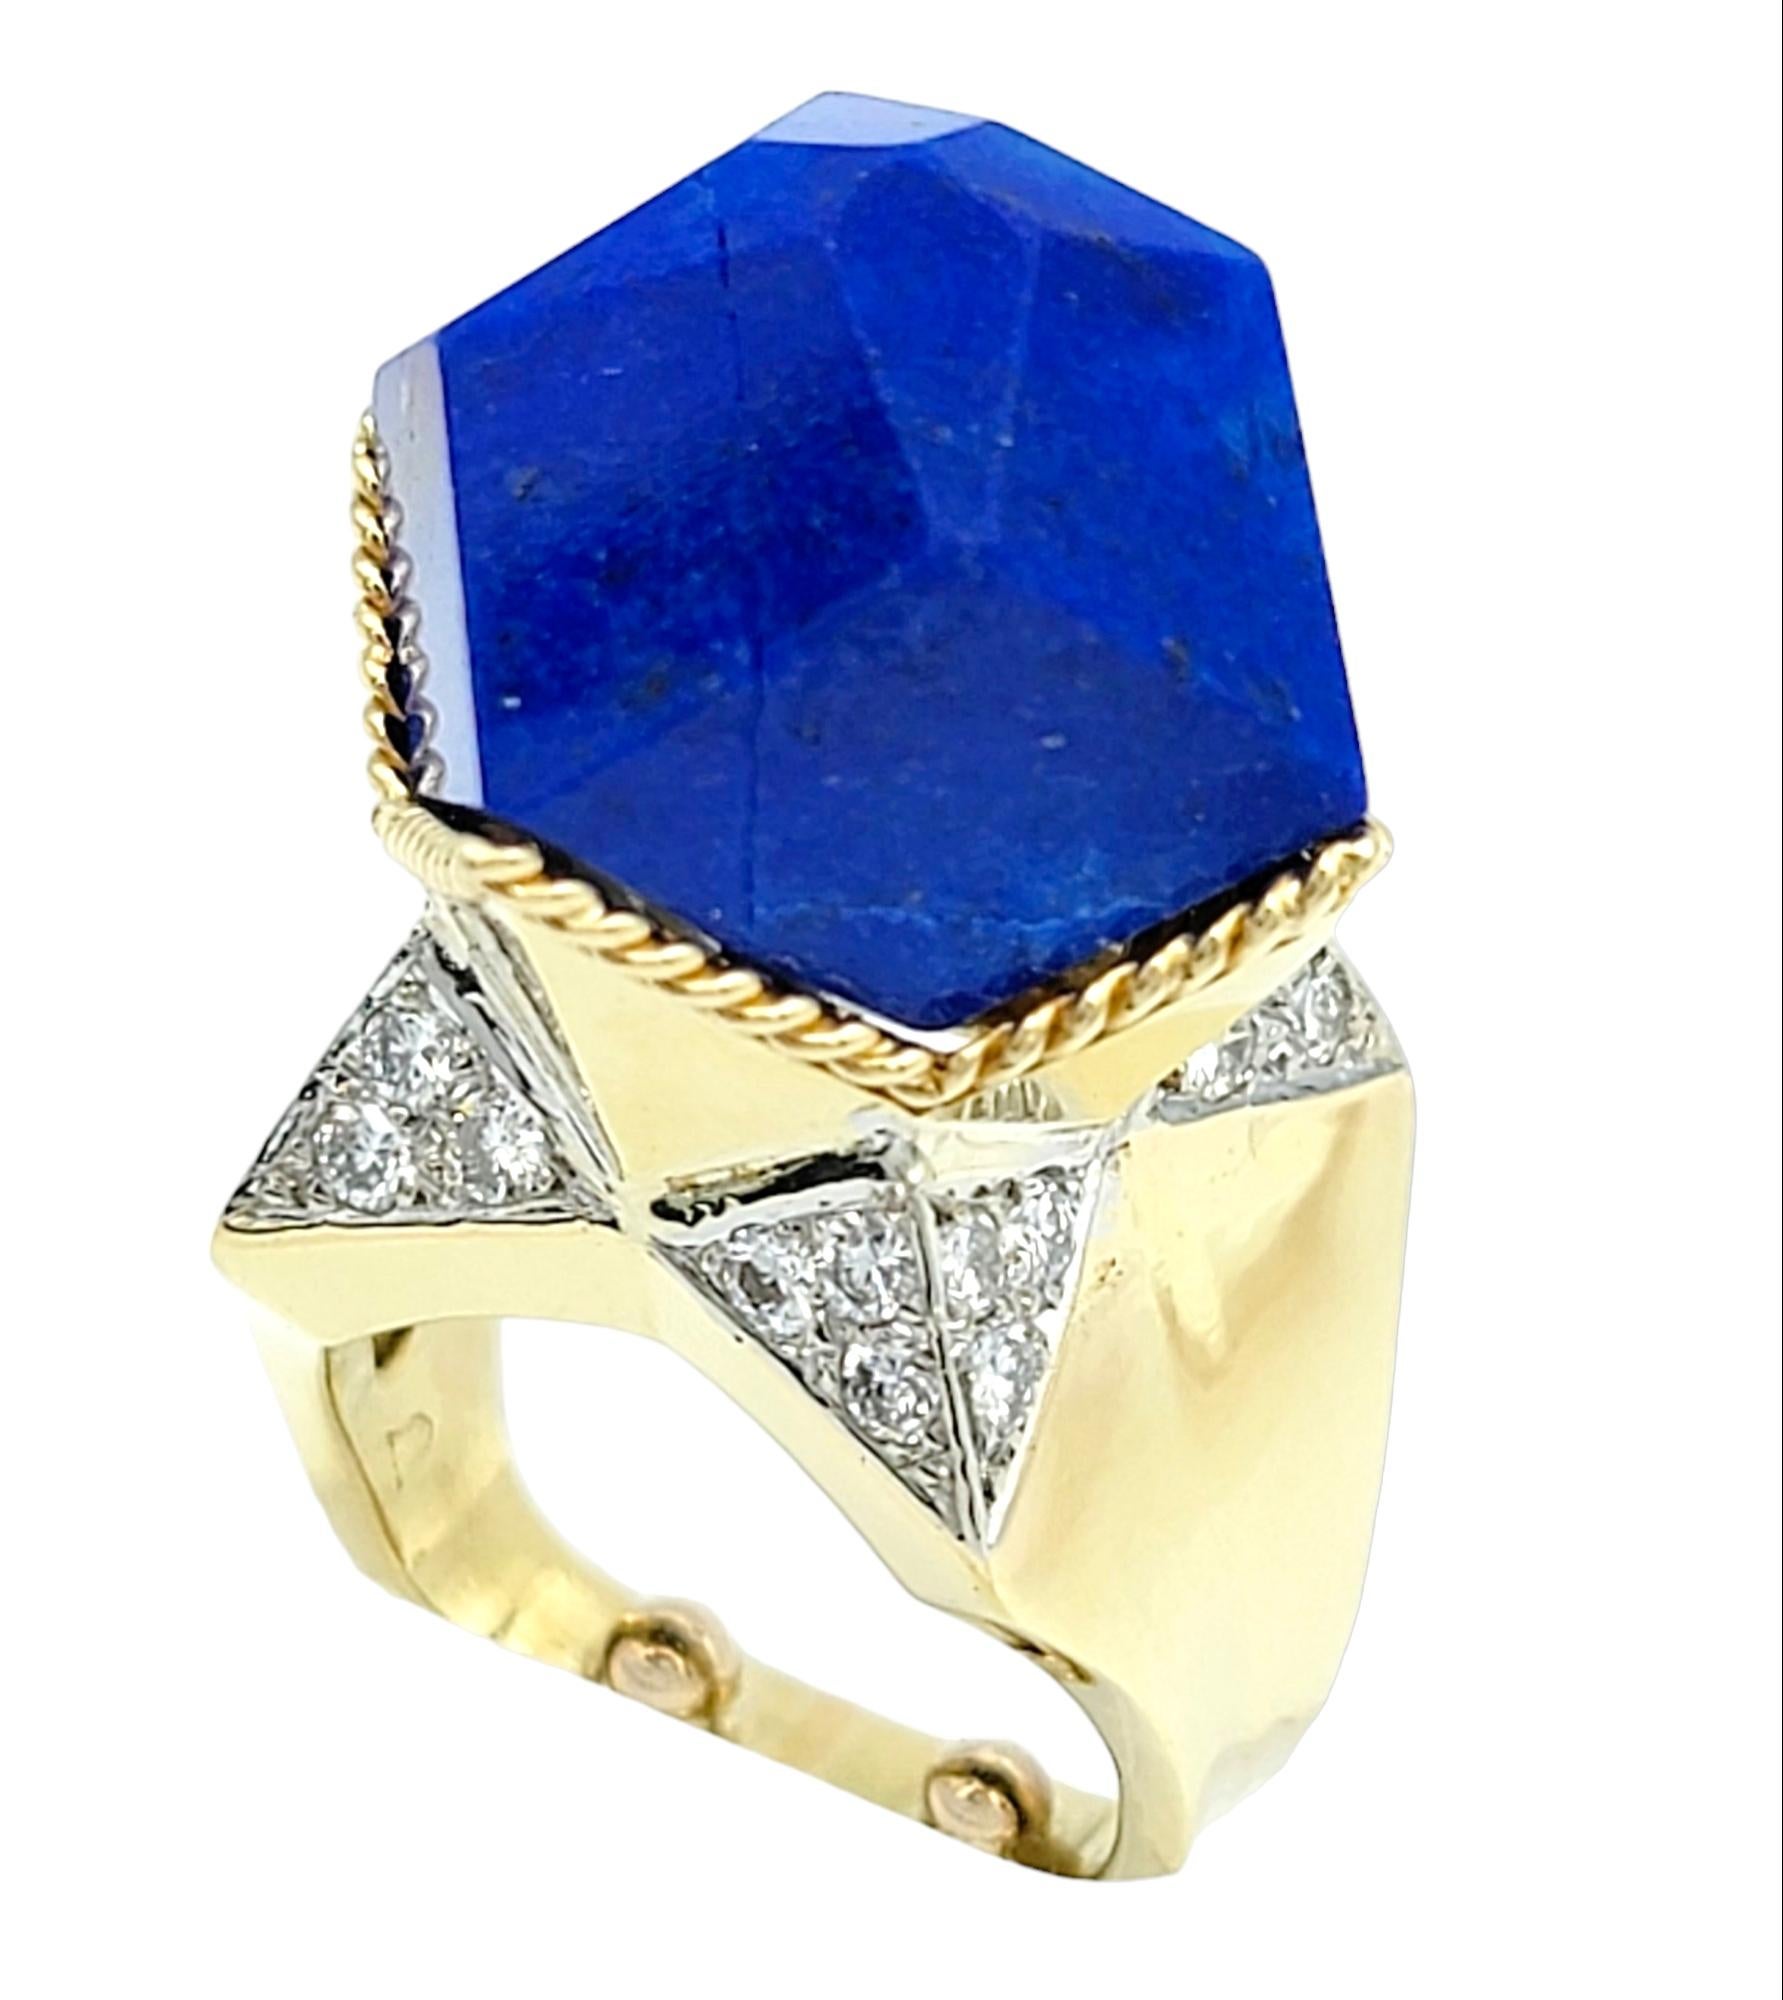 Blue Polygon Lapis Lazuli and Diamond Cocktail Ring Set in 18 Karat Yellow Gold In Fair Condition For Sale In Scottsdale, AZ